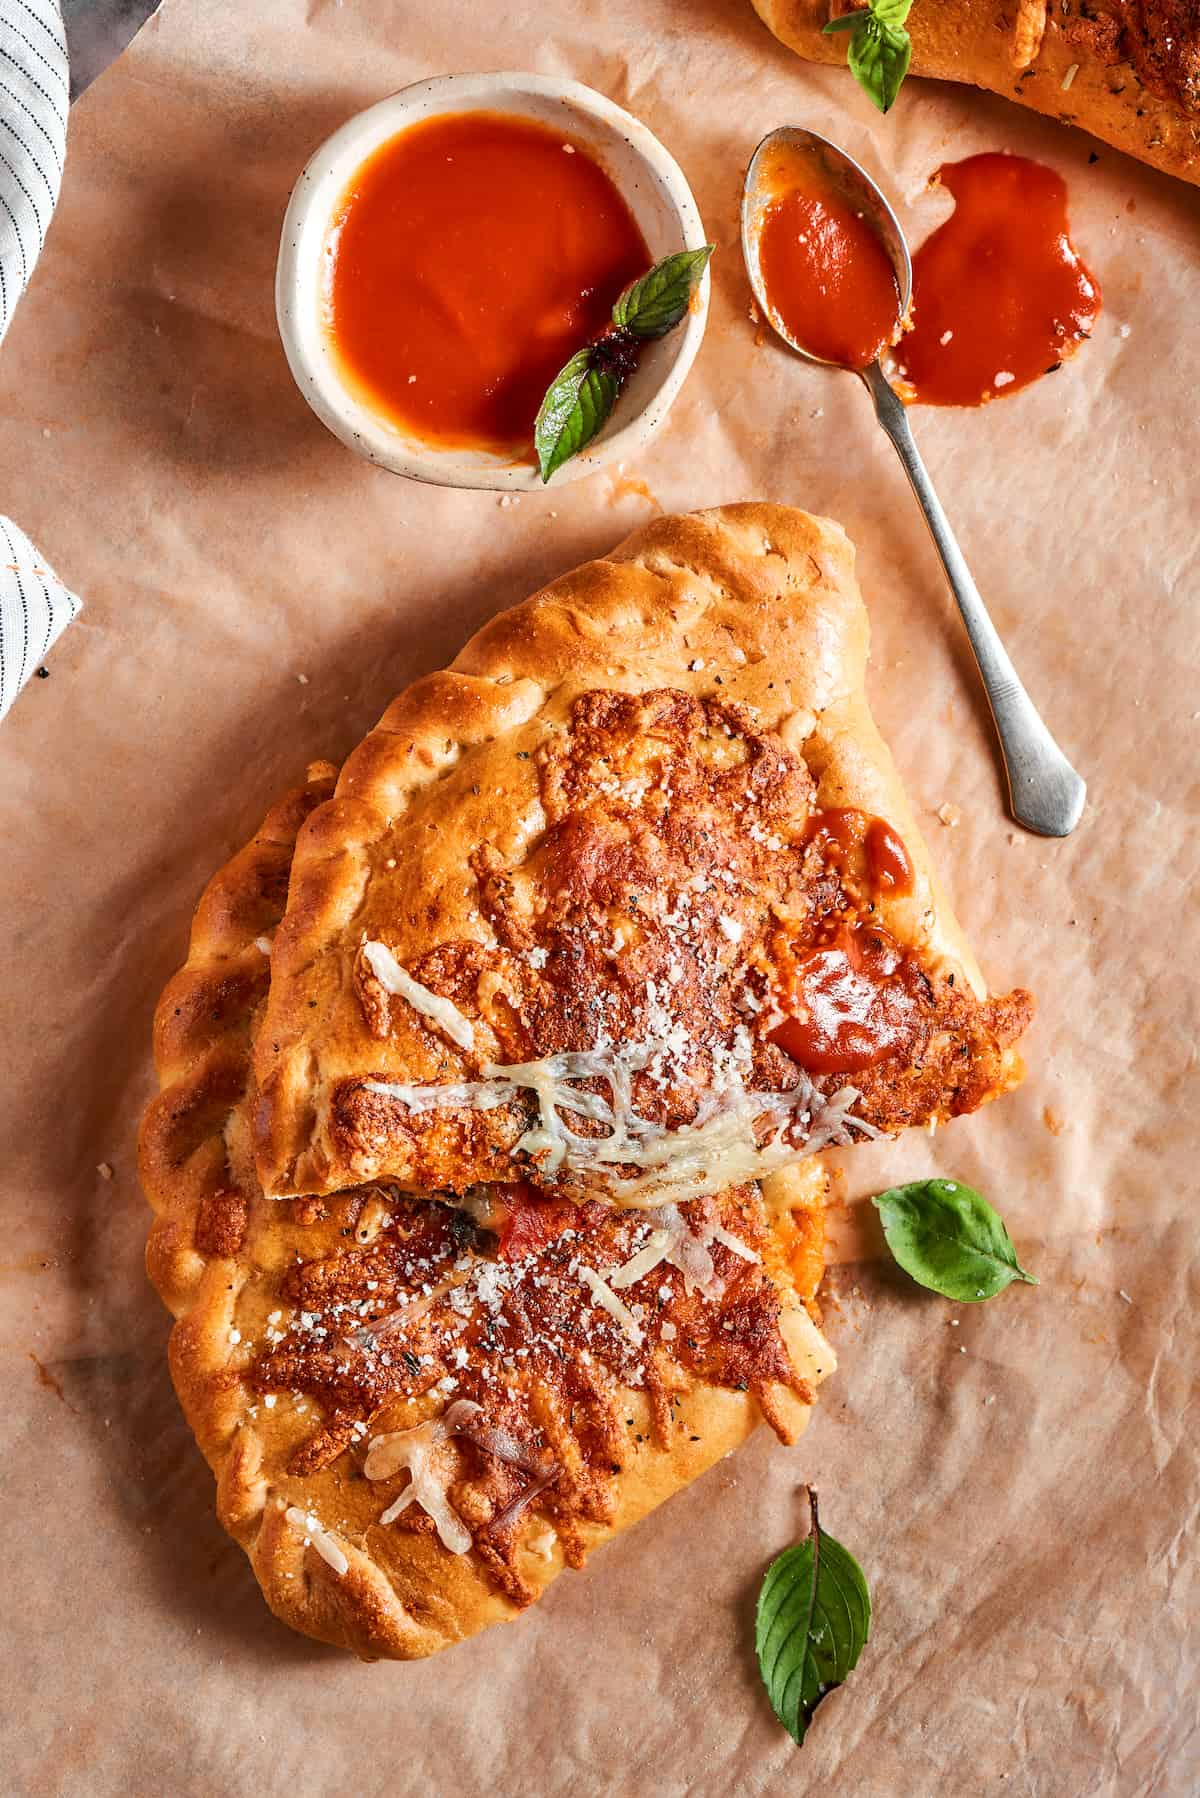 A calzone cut in half on a parchment-lined surface next to a bowl of dipping sauce.